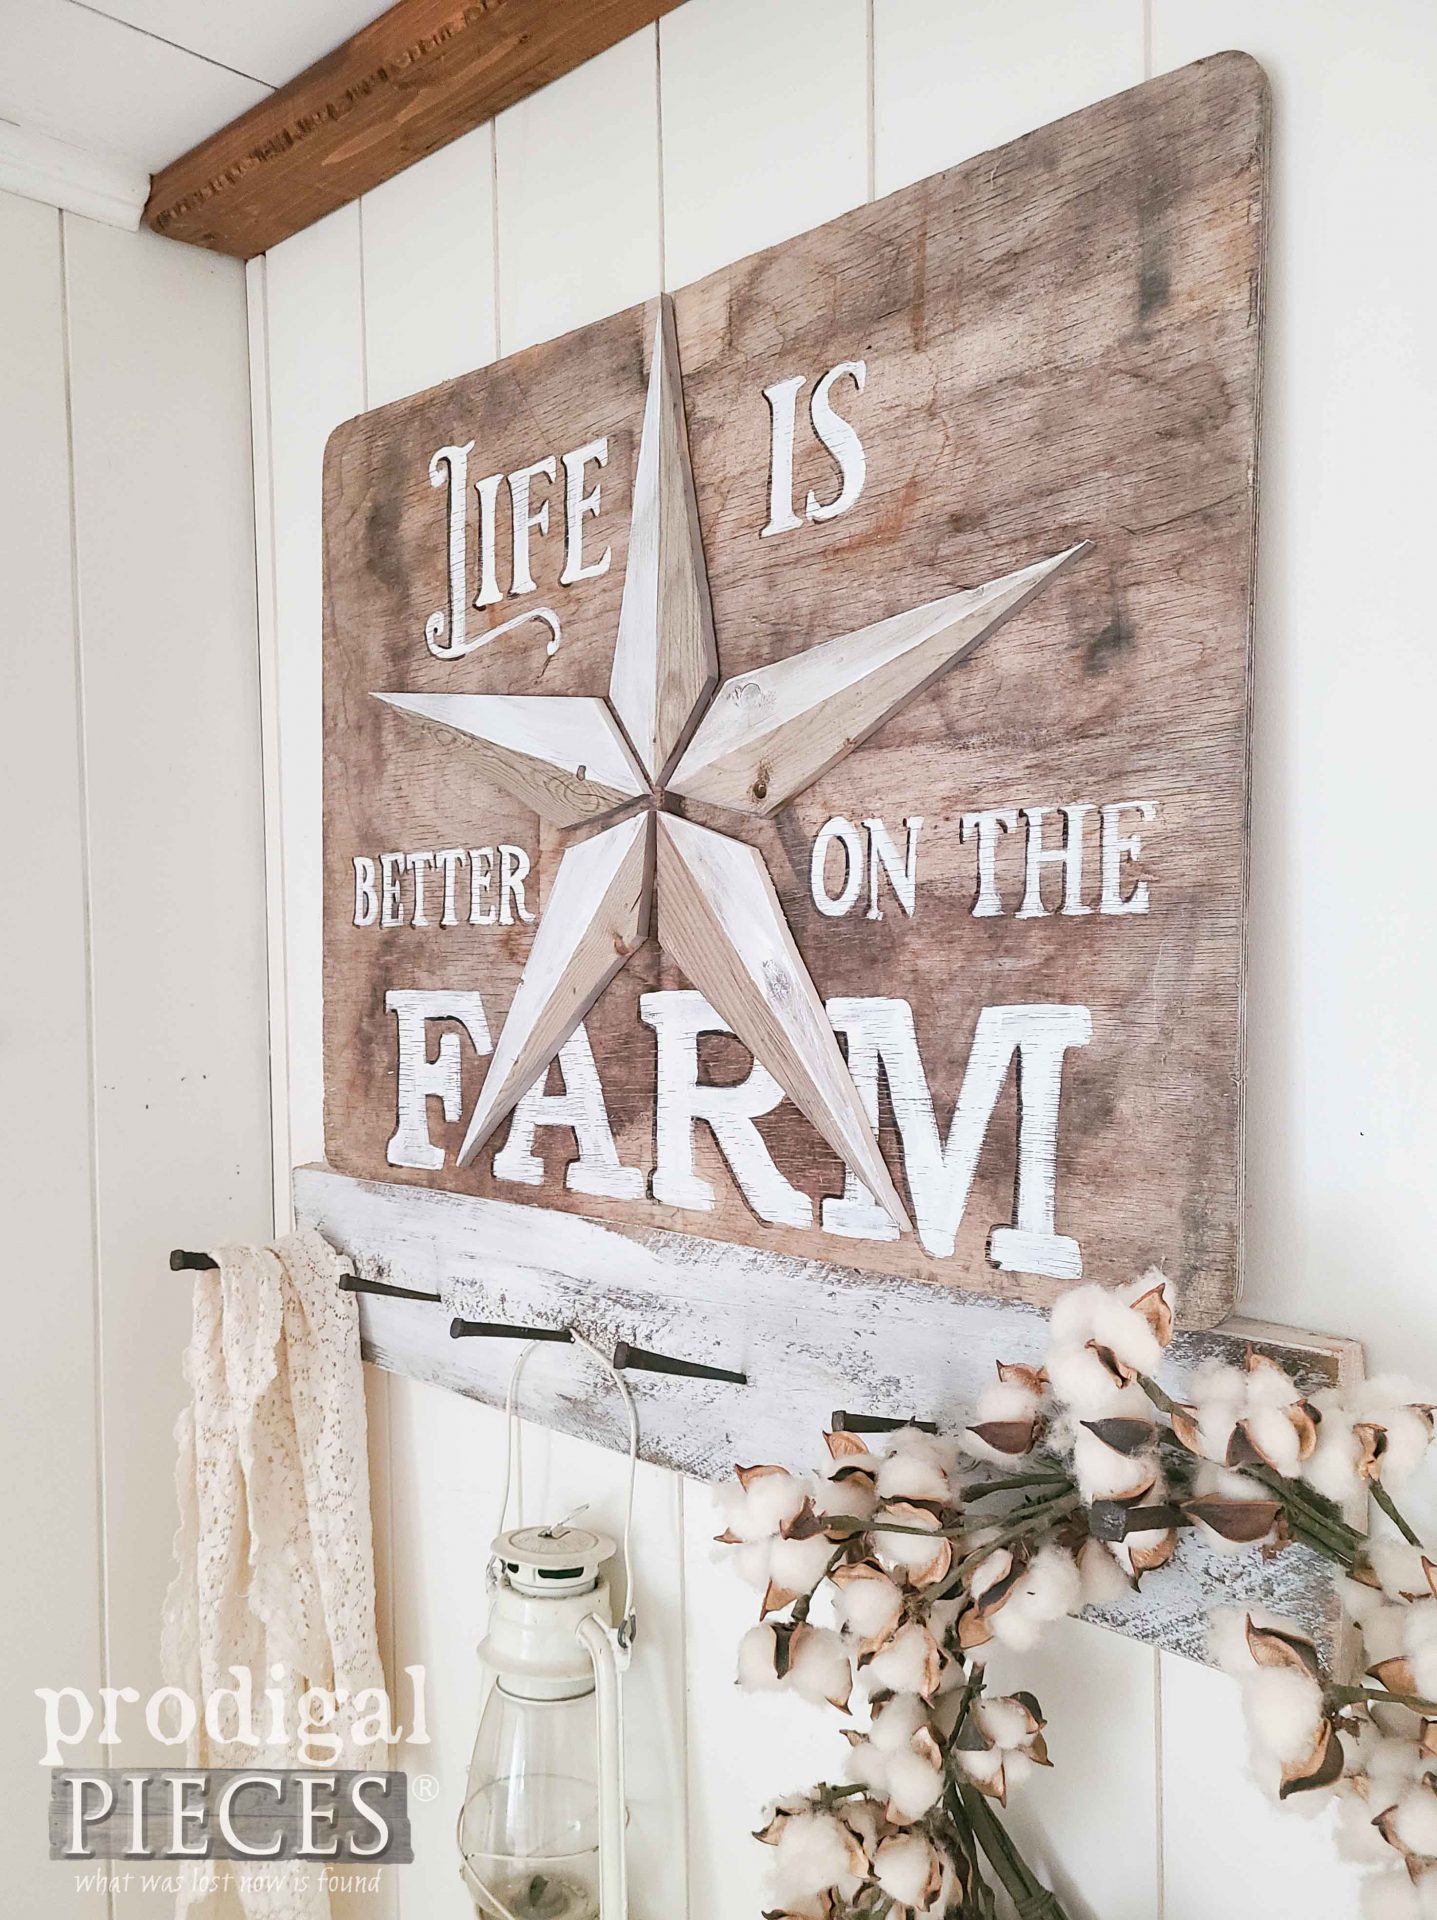 DIY Rustic Farmhouse Sign with Reclaimed Wood Star by Larissa of Prodigal Pieces | prodigalpieces.com #prodigalpieces #homedecor #diy